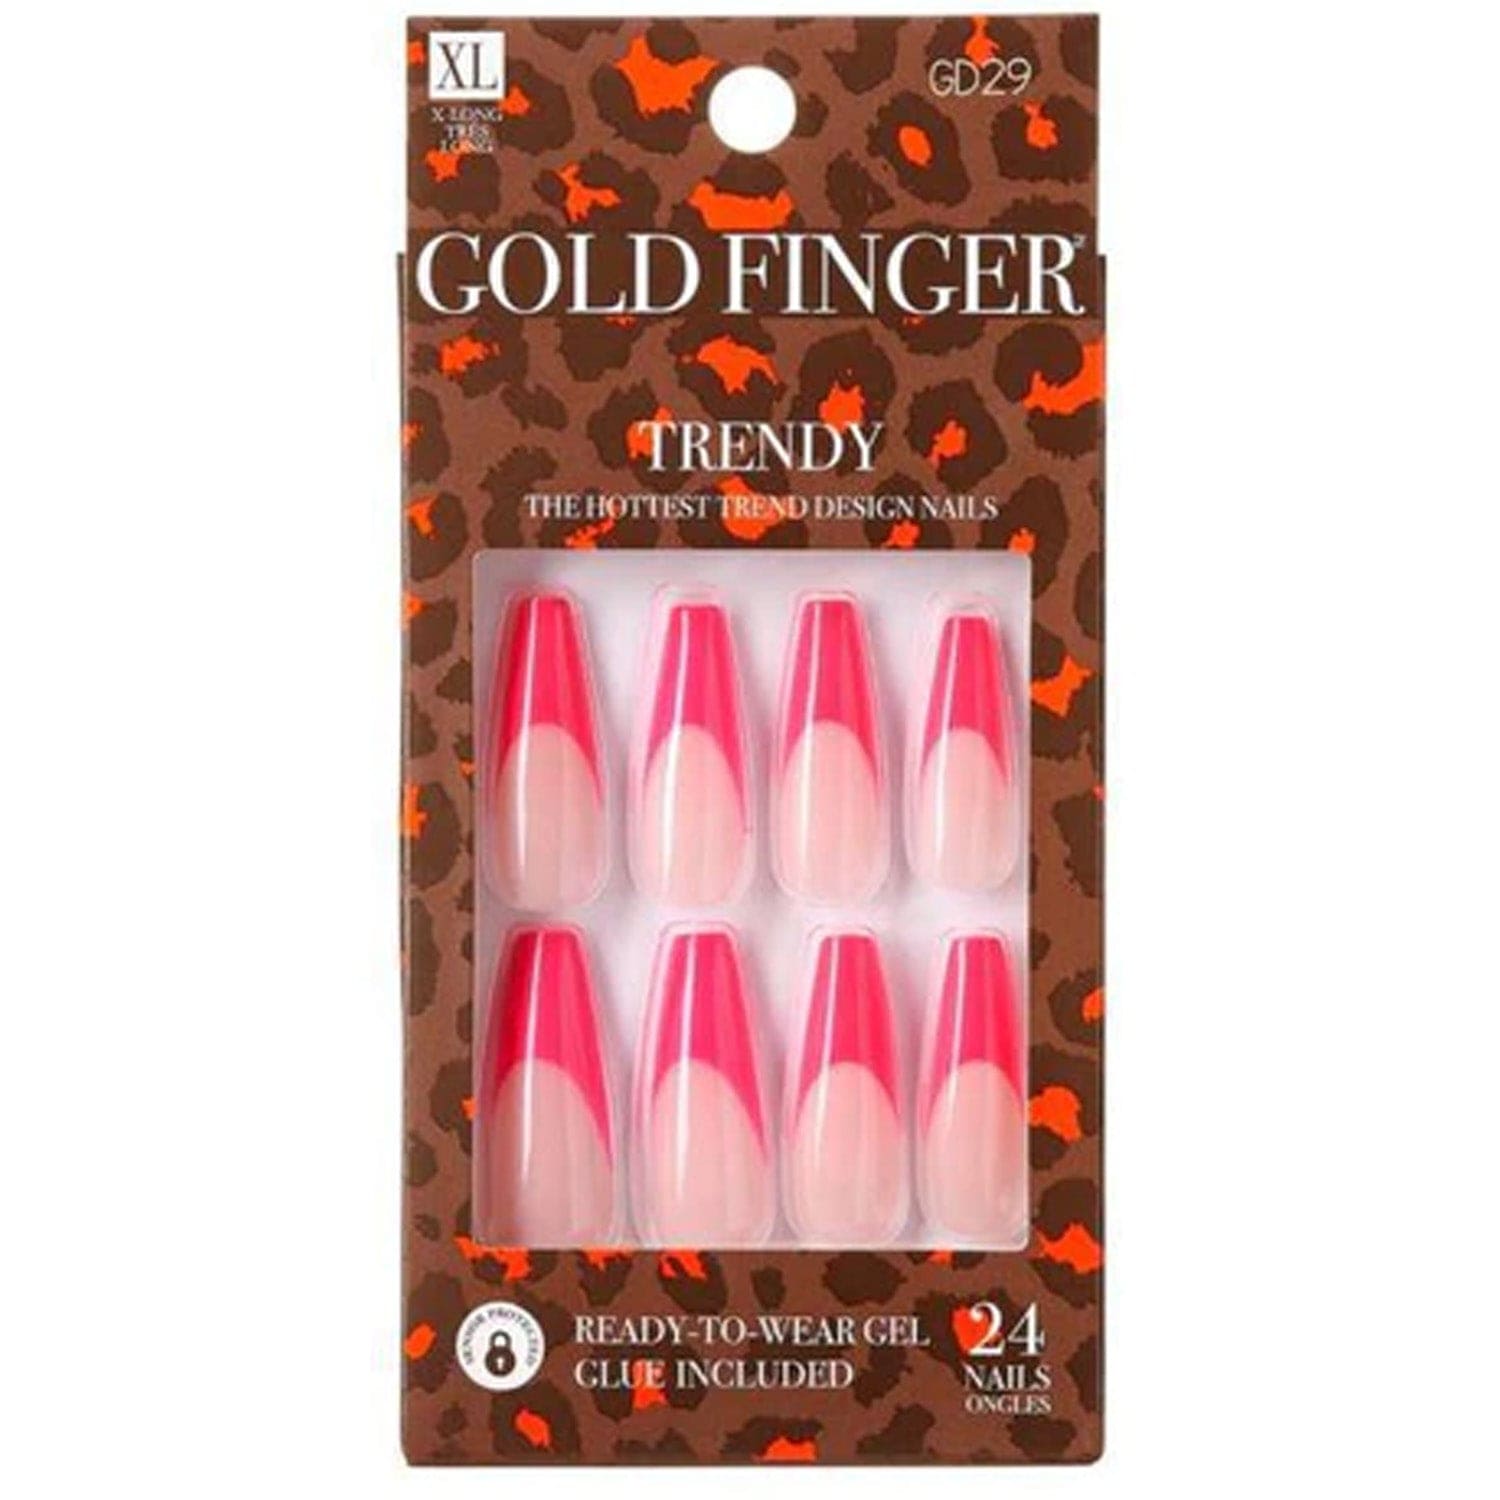 GOLDFINGER TRENDY NAILS CUTENESS OVERLOAD GD29